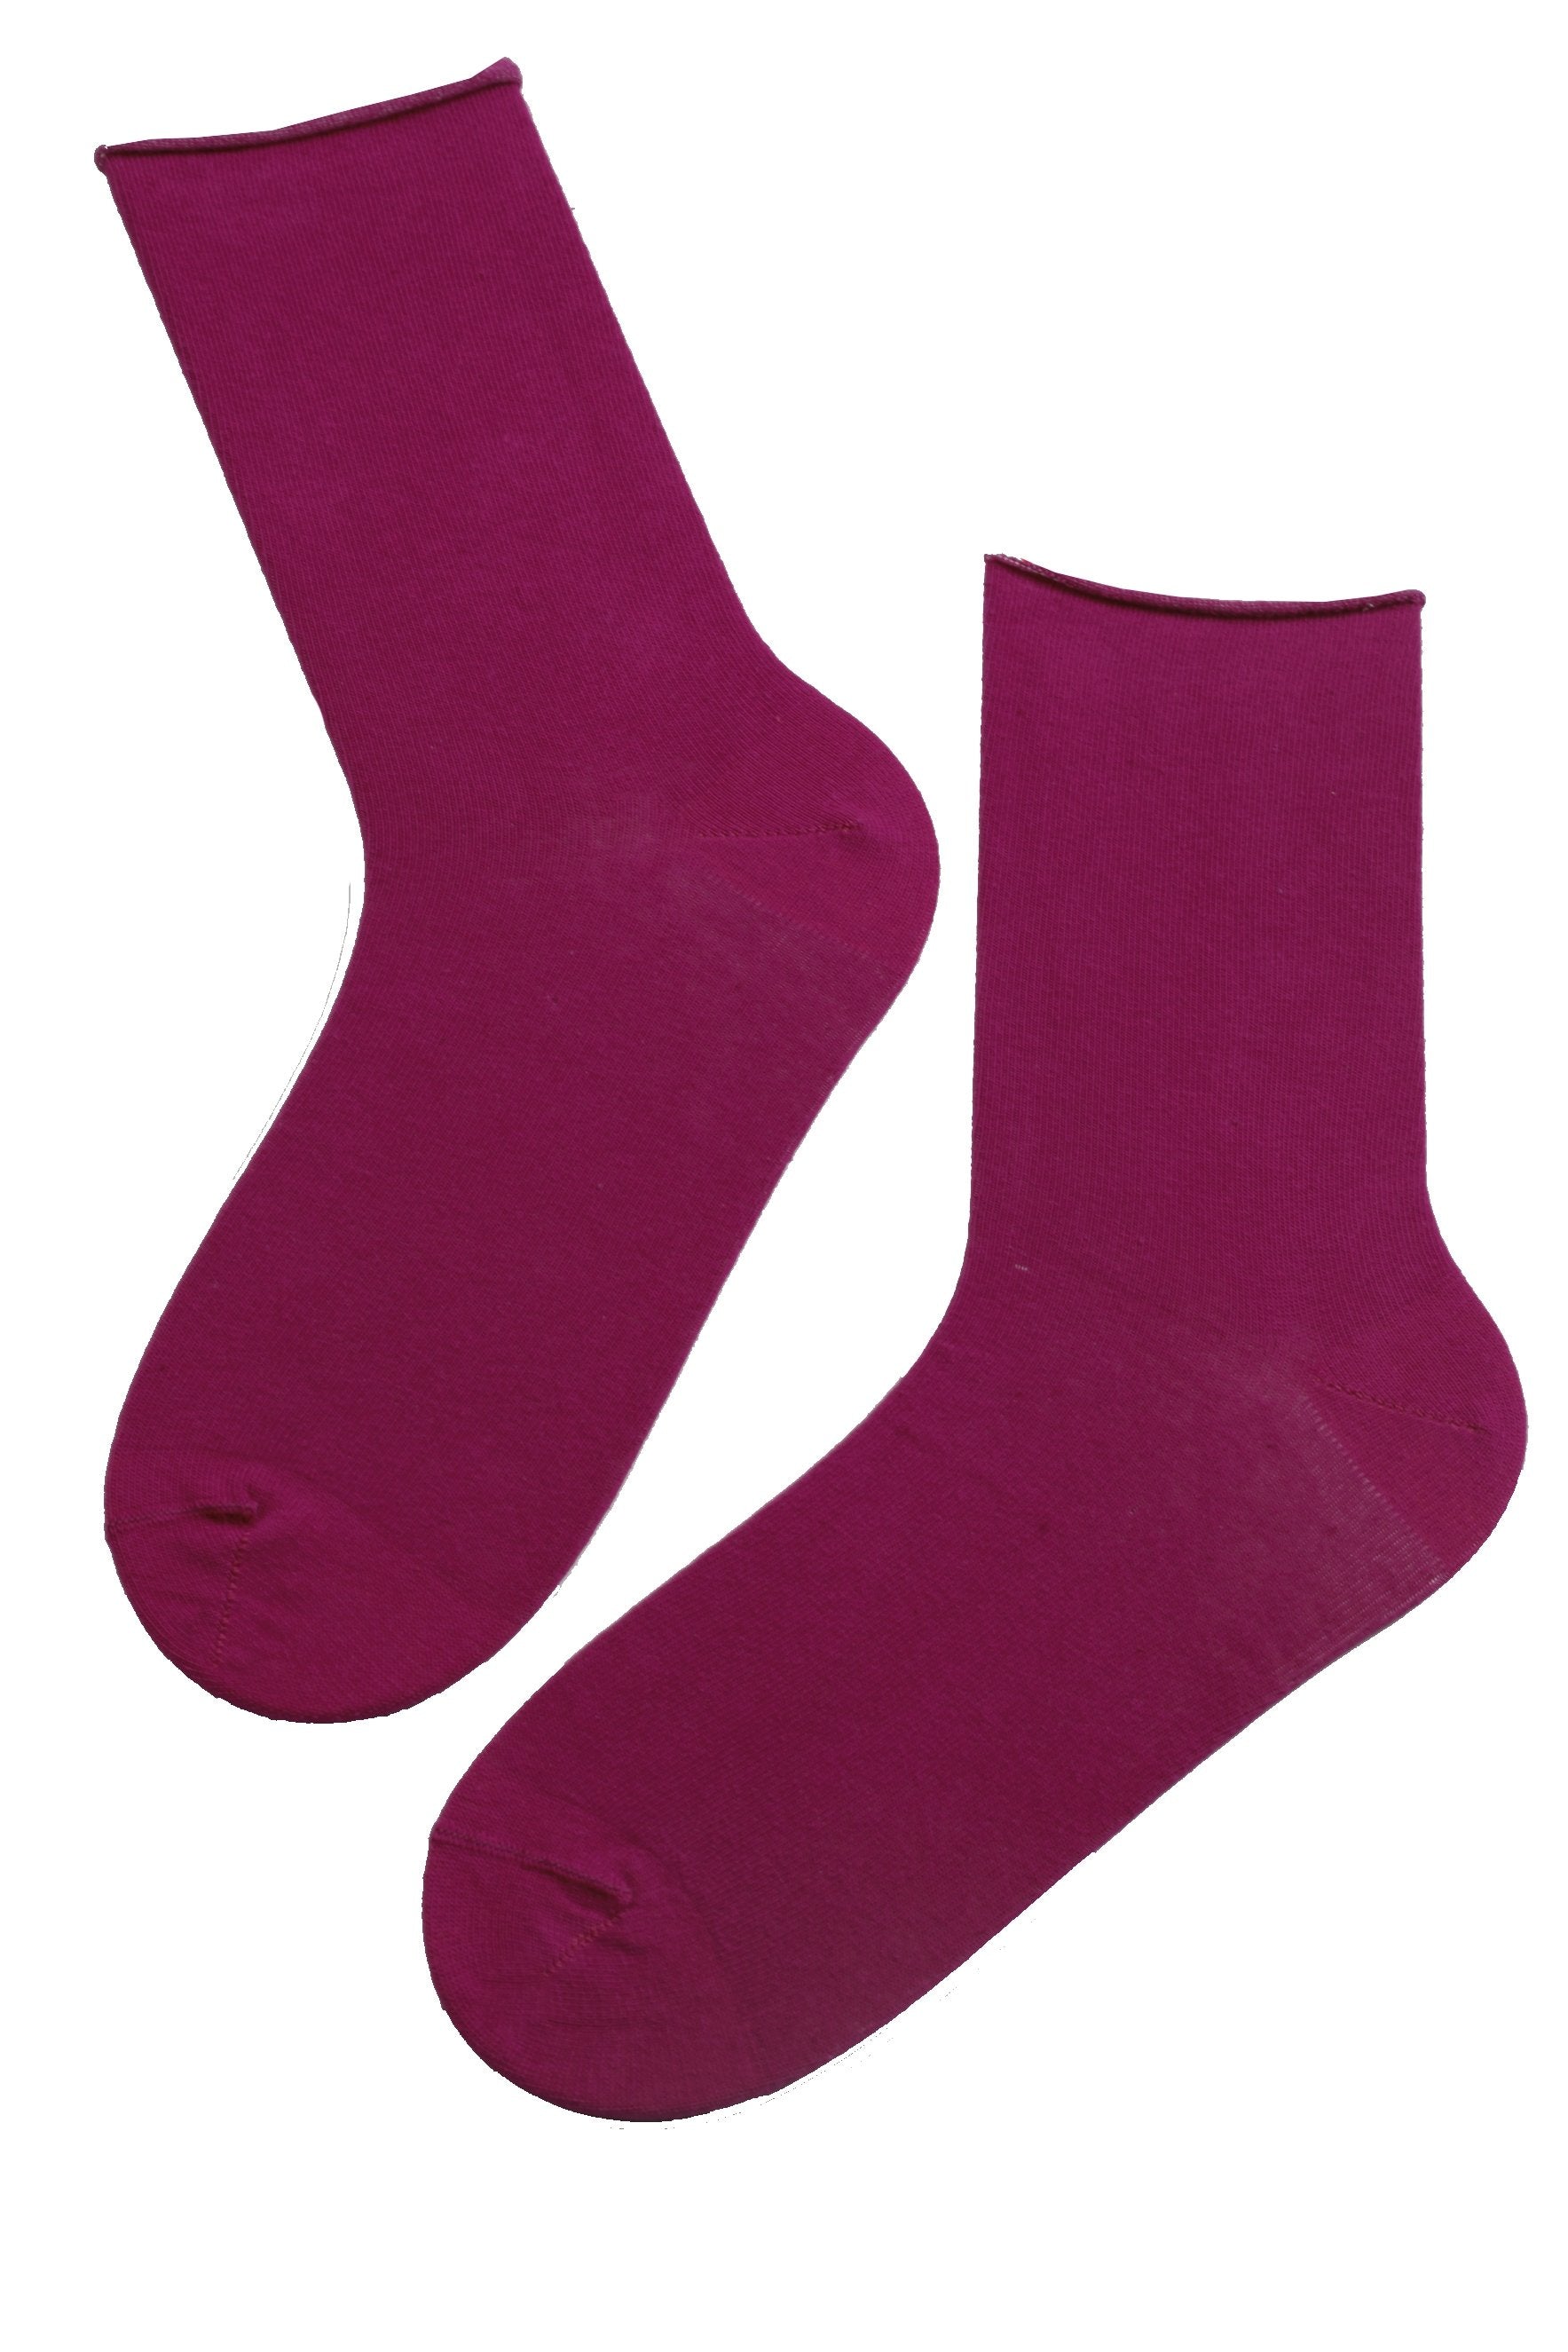 Orchid Themis Olev purple socks with a comfortable edge for men